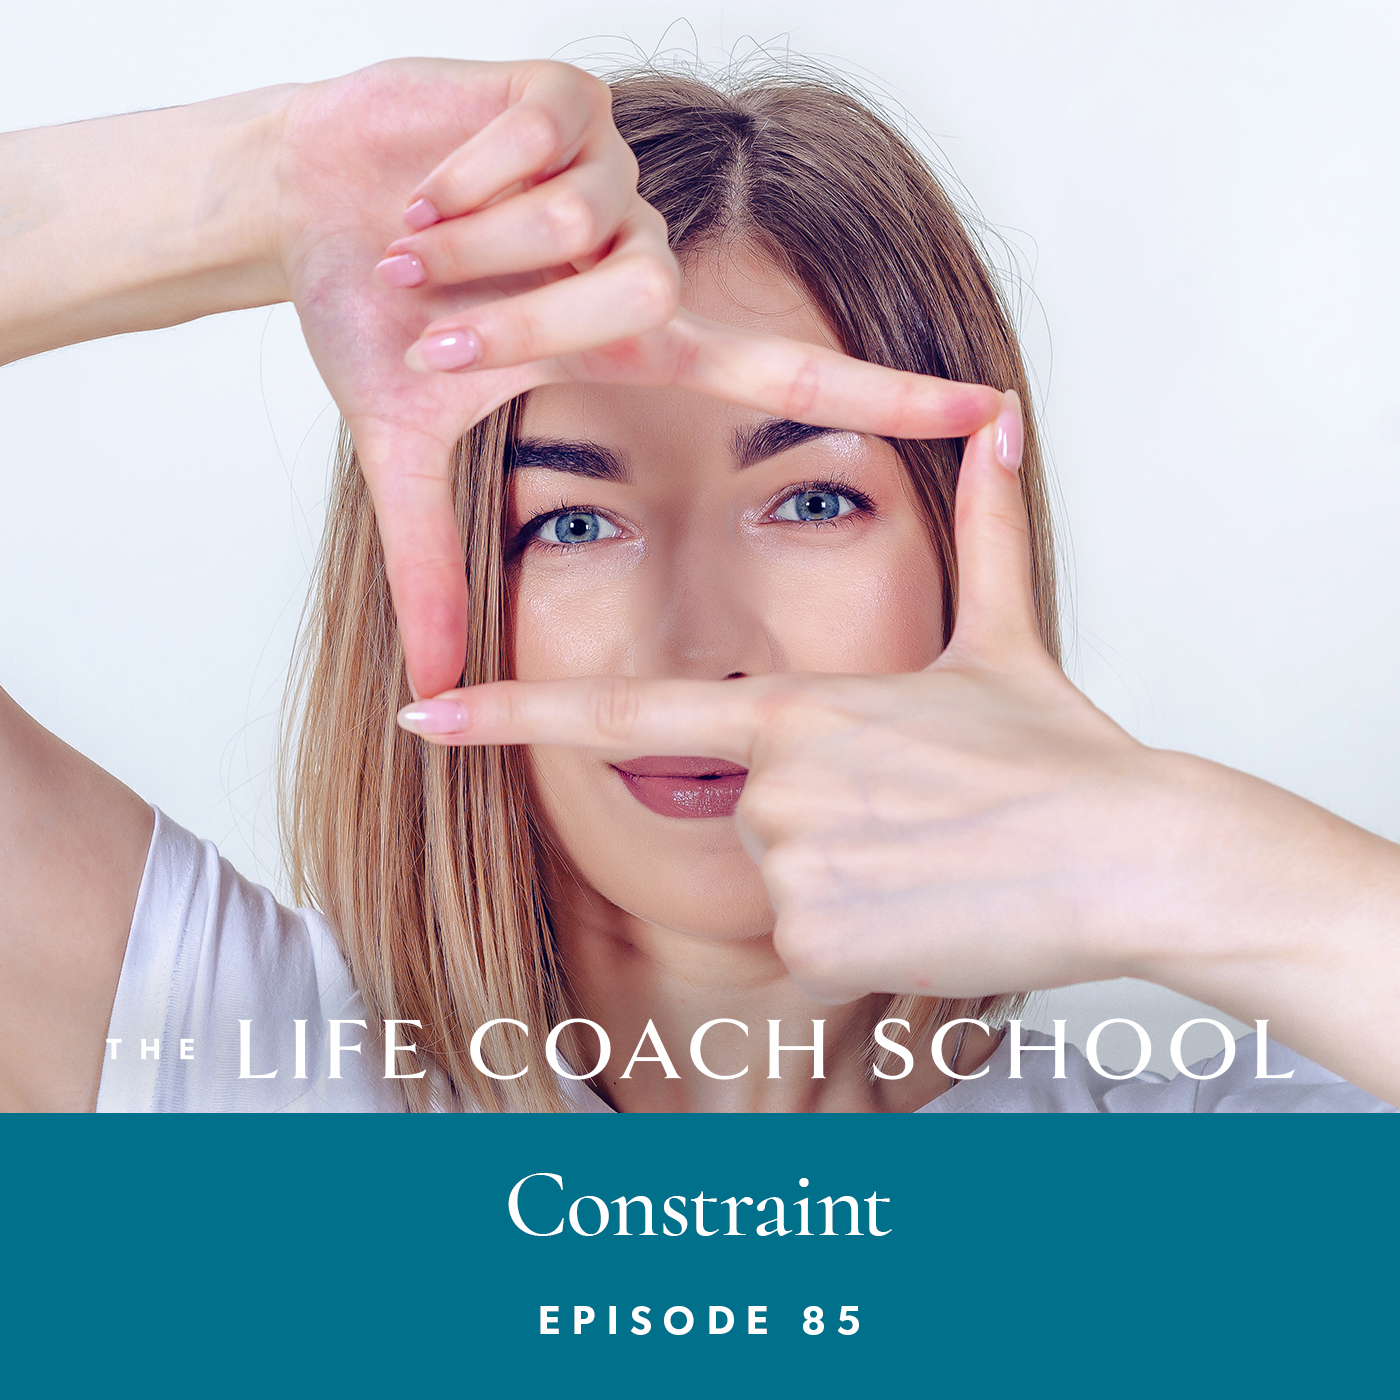 The Life Coach School Podcast with Brooke Castillo | Episode 85 | Constraint